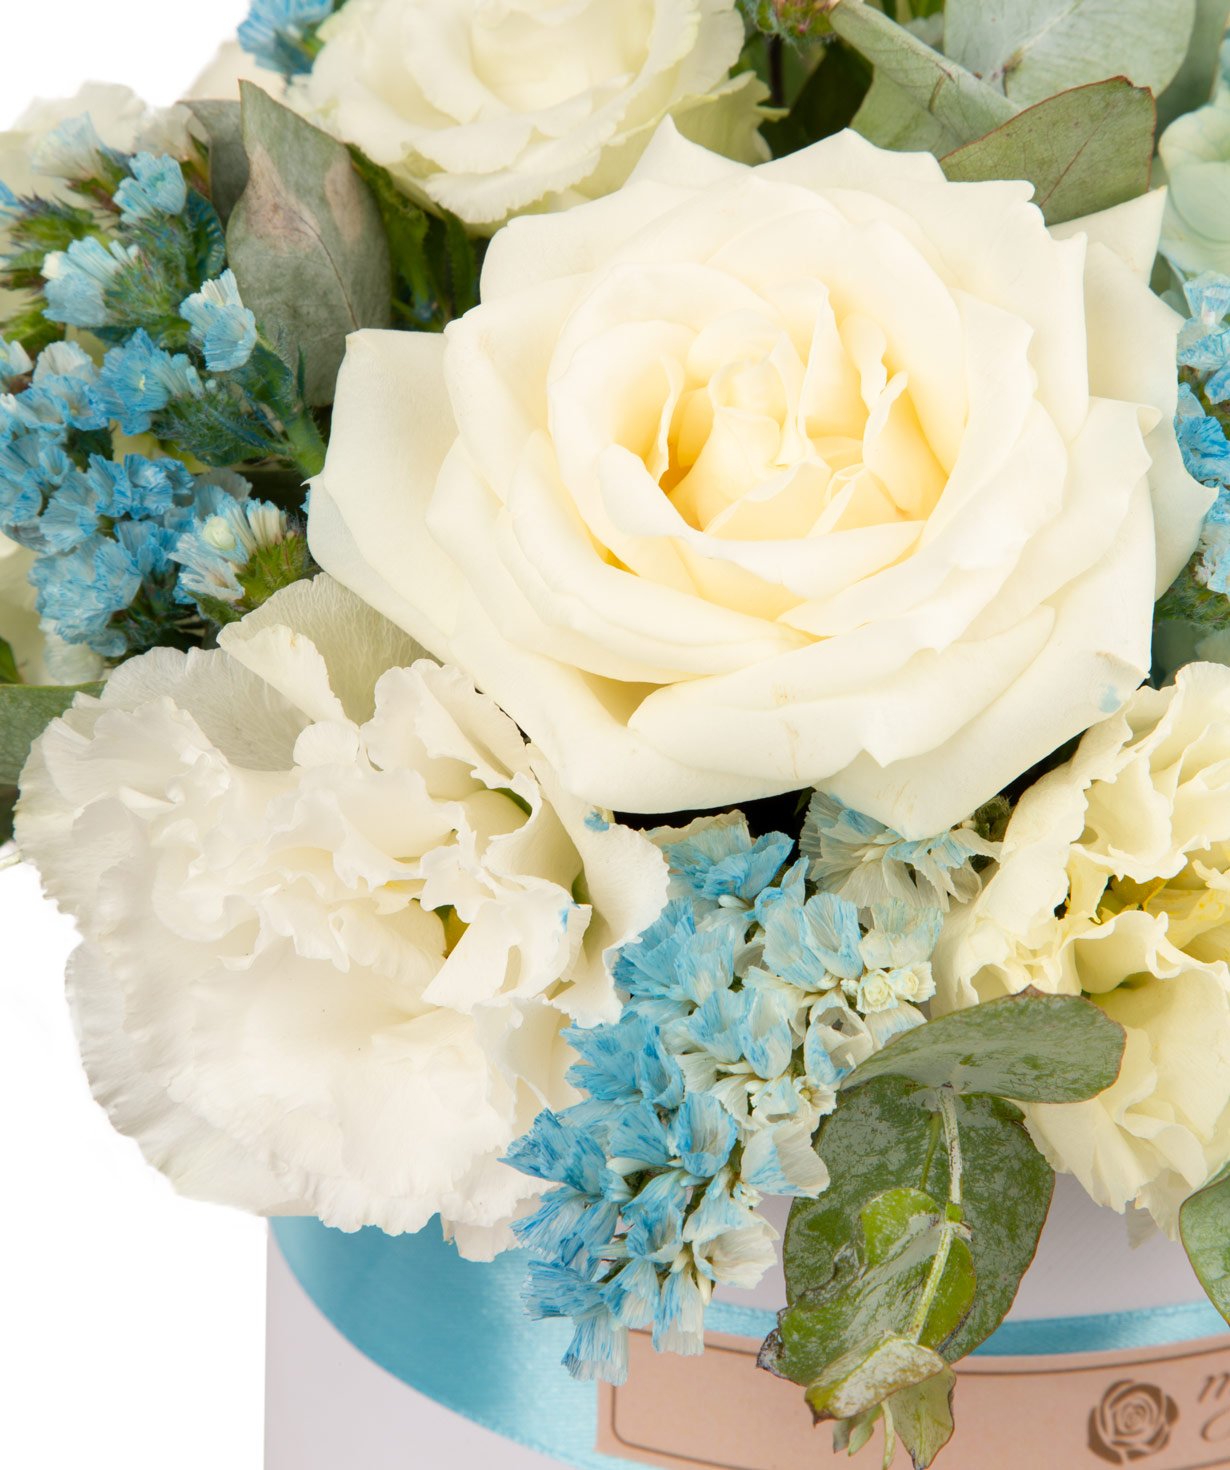 Composition `Apencel` with hydrangea, rose, lisianthus and limonium